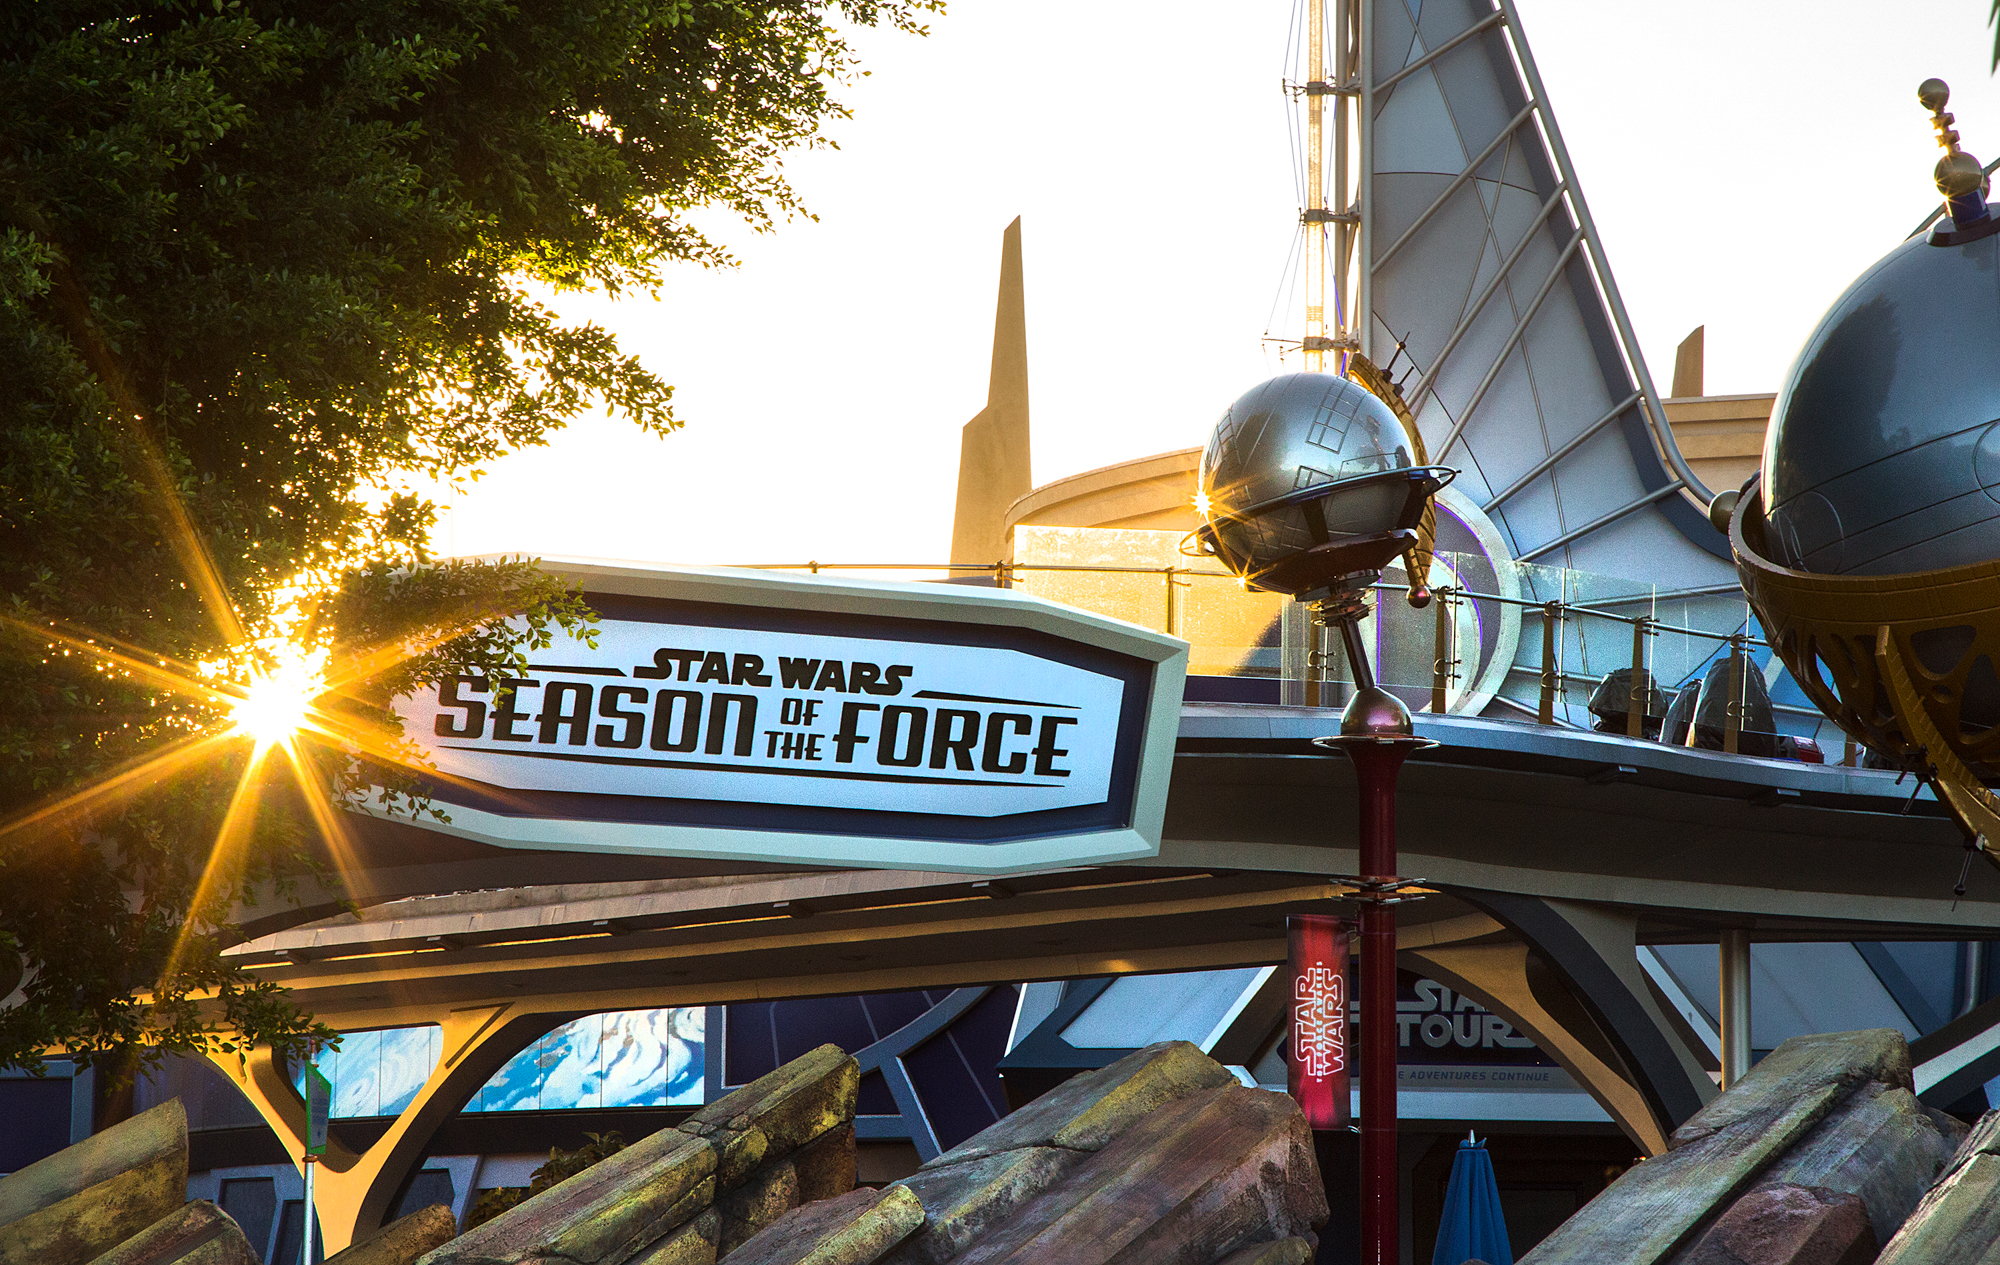 Take a Look at Star Wars Season of the Force from Disneyland!